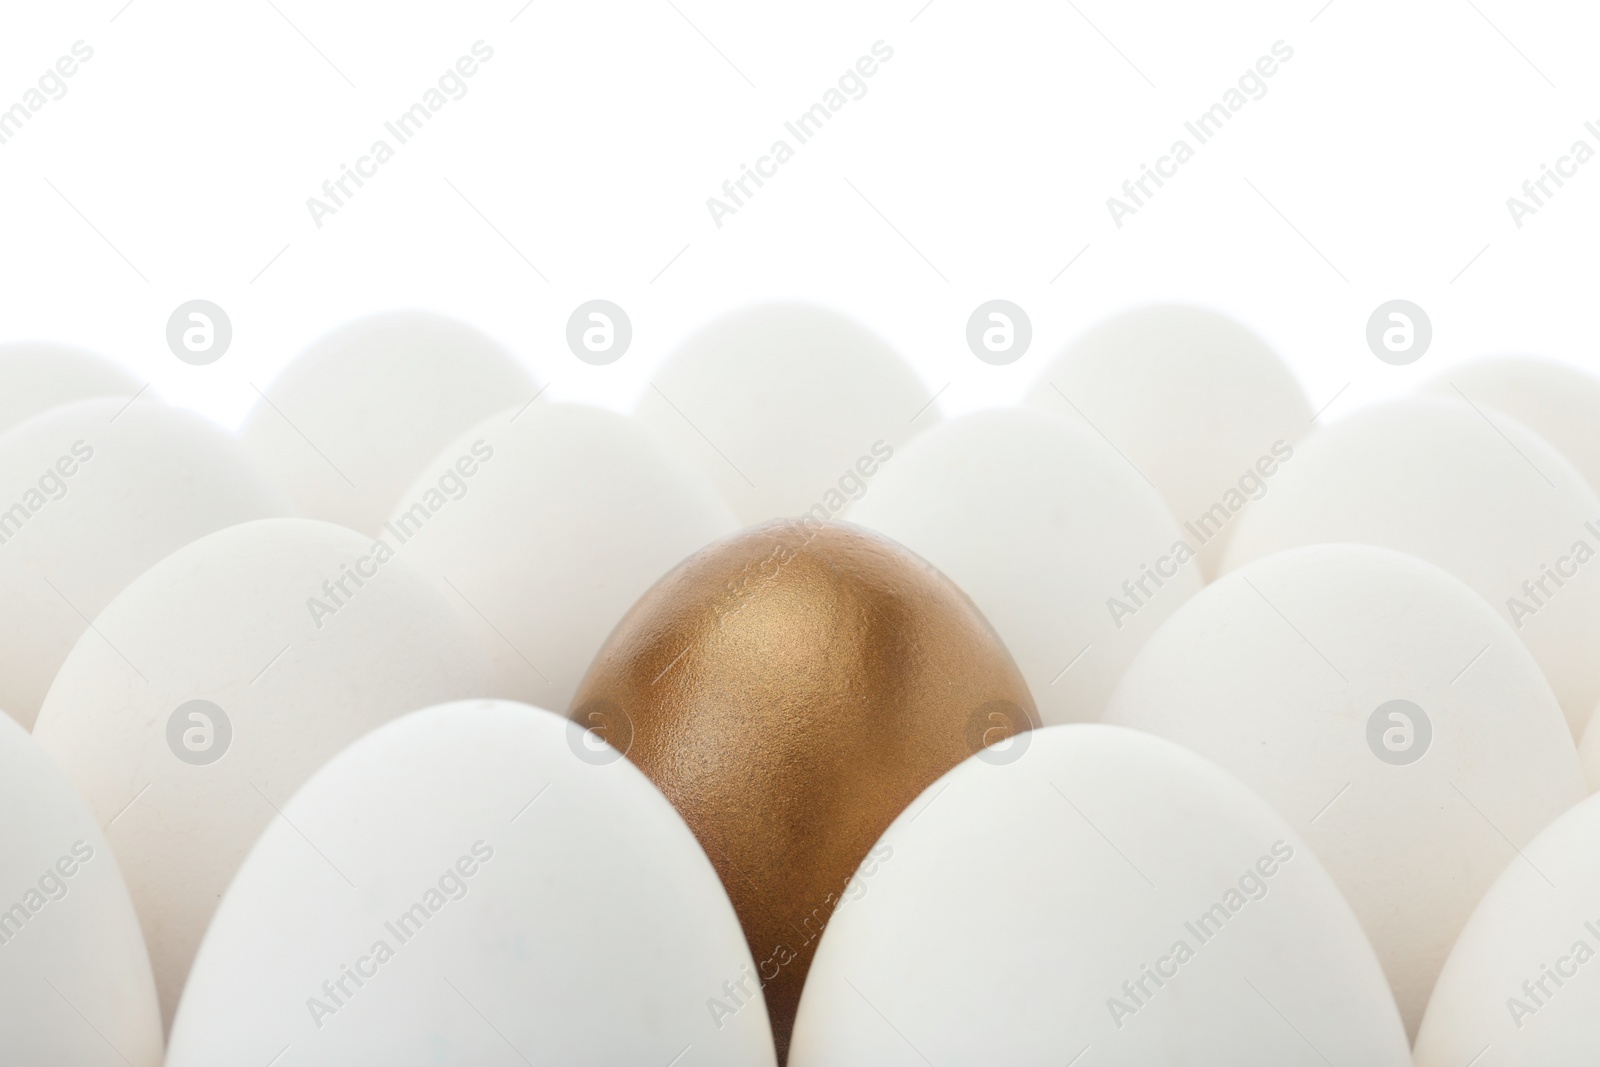 Photo of Golden egg among ordinary ones on white background, closeup